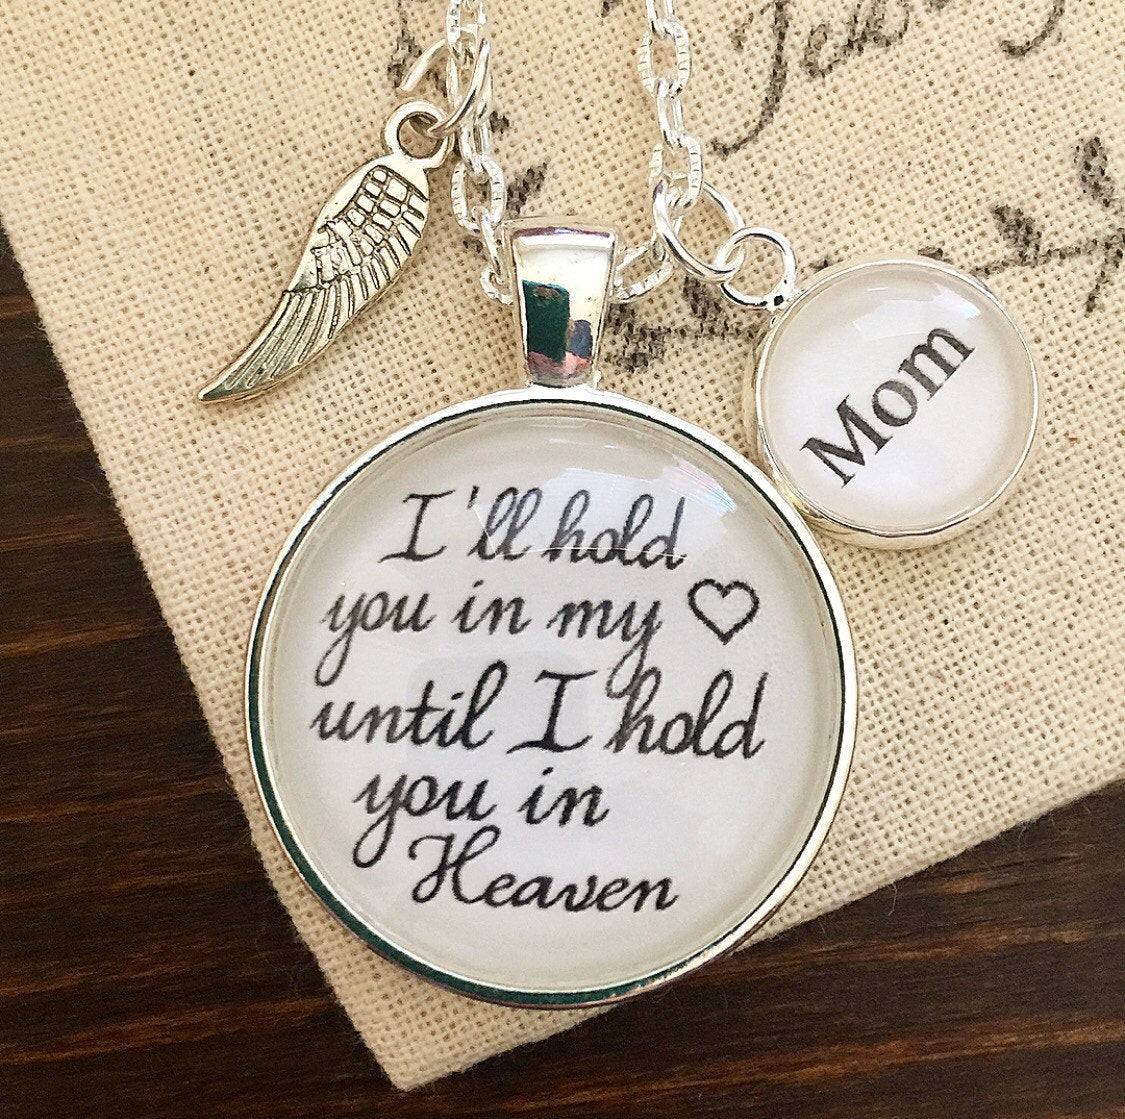 Pendant Necklace "I'll hold you in my heart until I hold you in Heaven" - Redeemed Jewelry